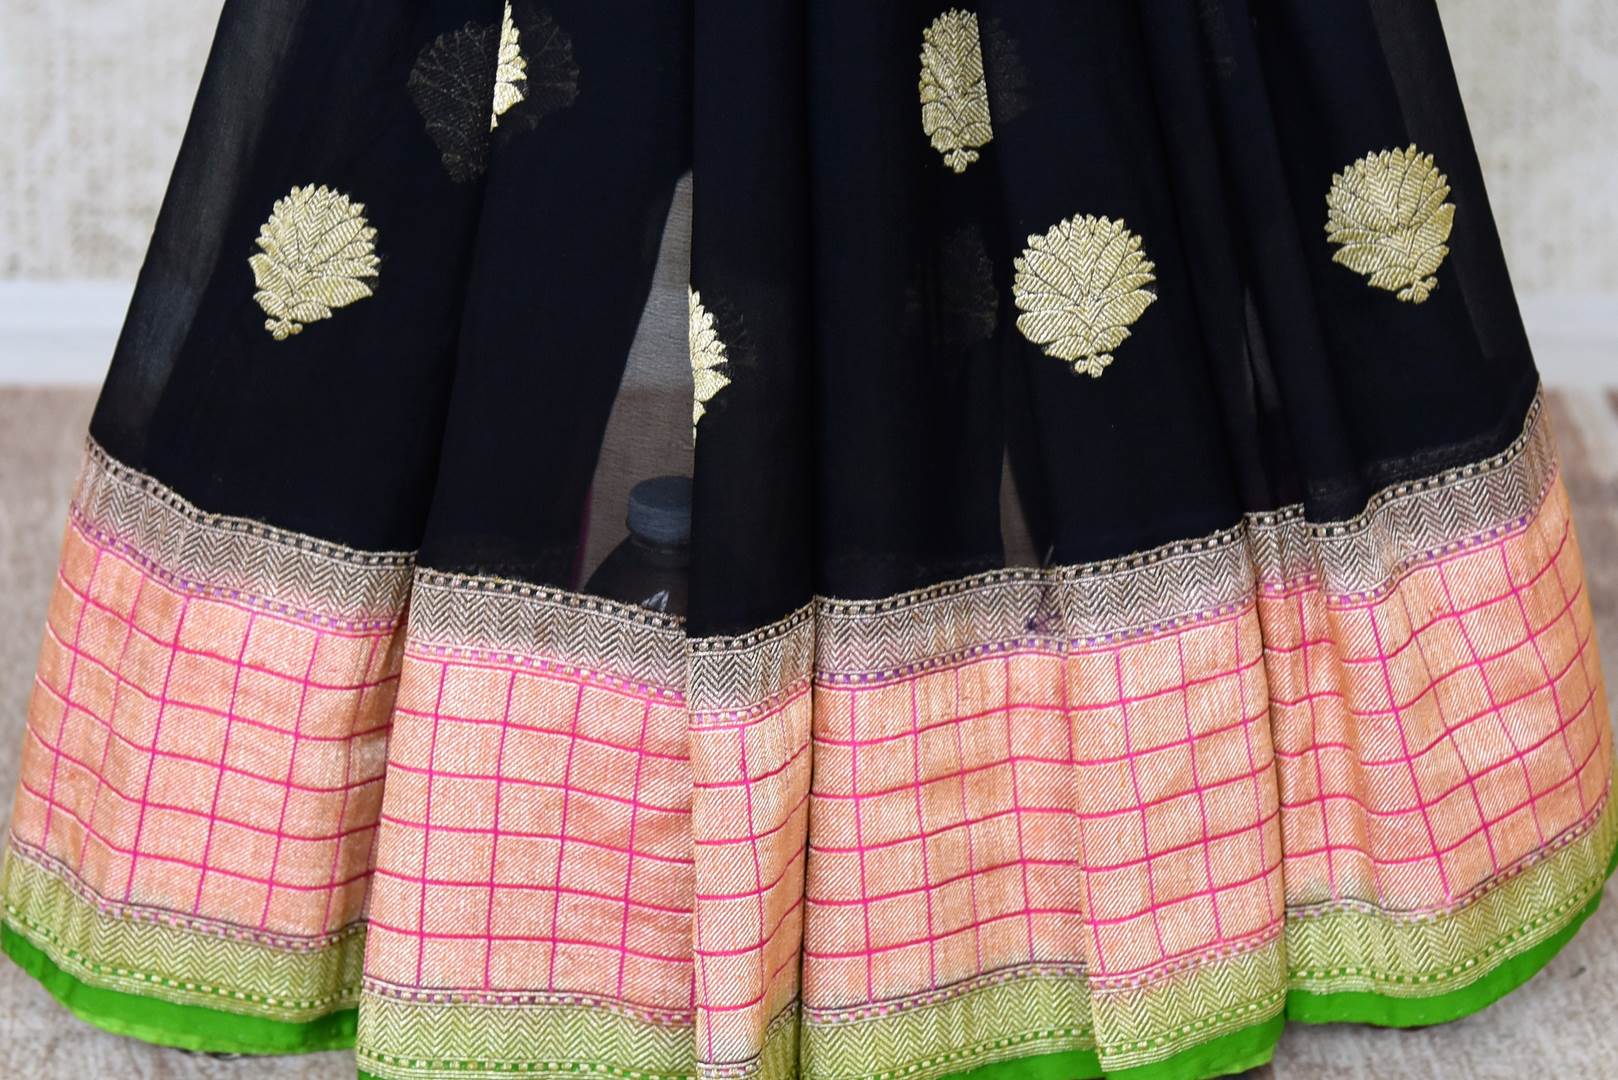 Buy stunning black georgette Banarasi sari online in USA with floral zari buta and check zari border. Elevate your traditional saree style with beautiful Indian Banarasi saris from Pure Elegance Indian fashion store in USA. We also have a stunning variety of bridal saris for Indian brides in USA. Shop now.-pleats